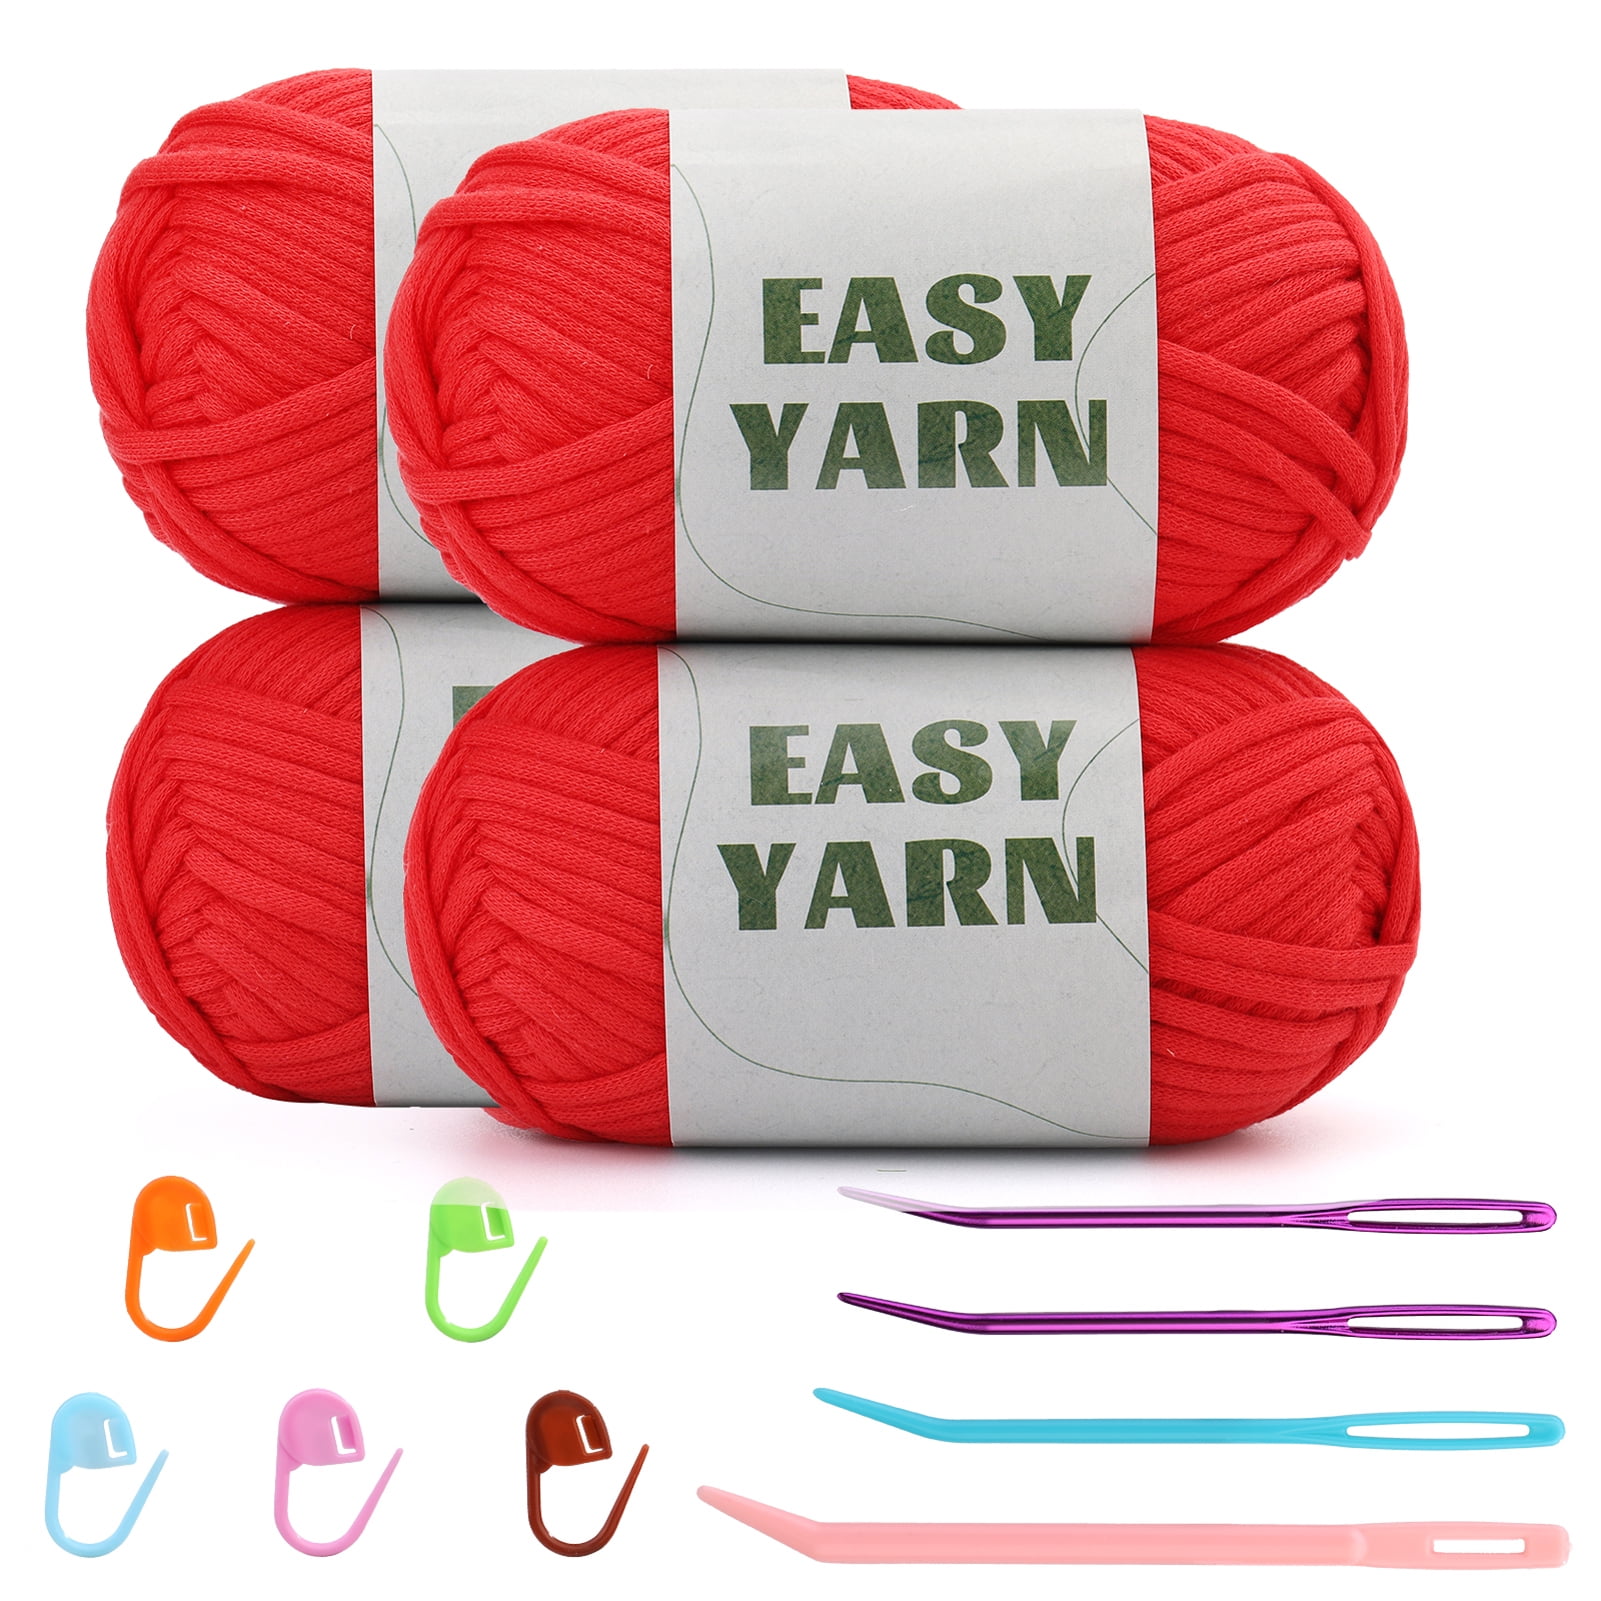 Bupete Yarn for Crocheting & Knitting, Easy Yarn for Beginners with  Easy-to-See Stitches, Stitch Marker, Big Eye Blunt Needle, Beginner Yarn  for Crocheting,(Red) 